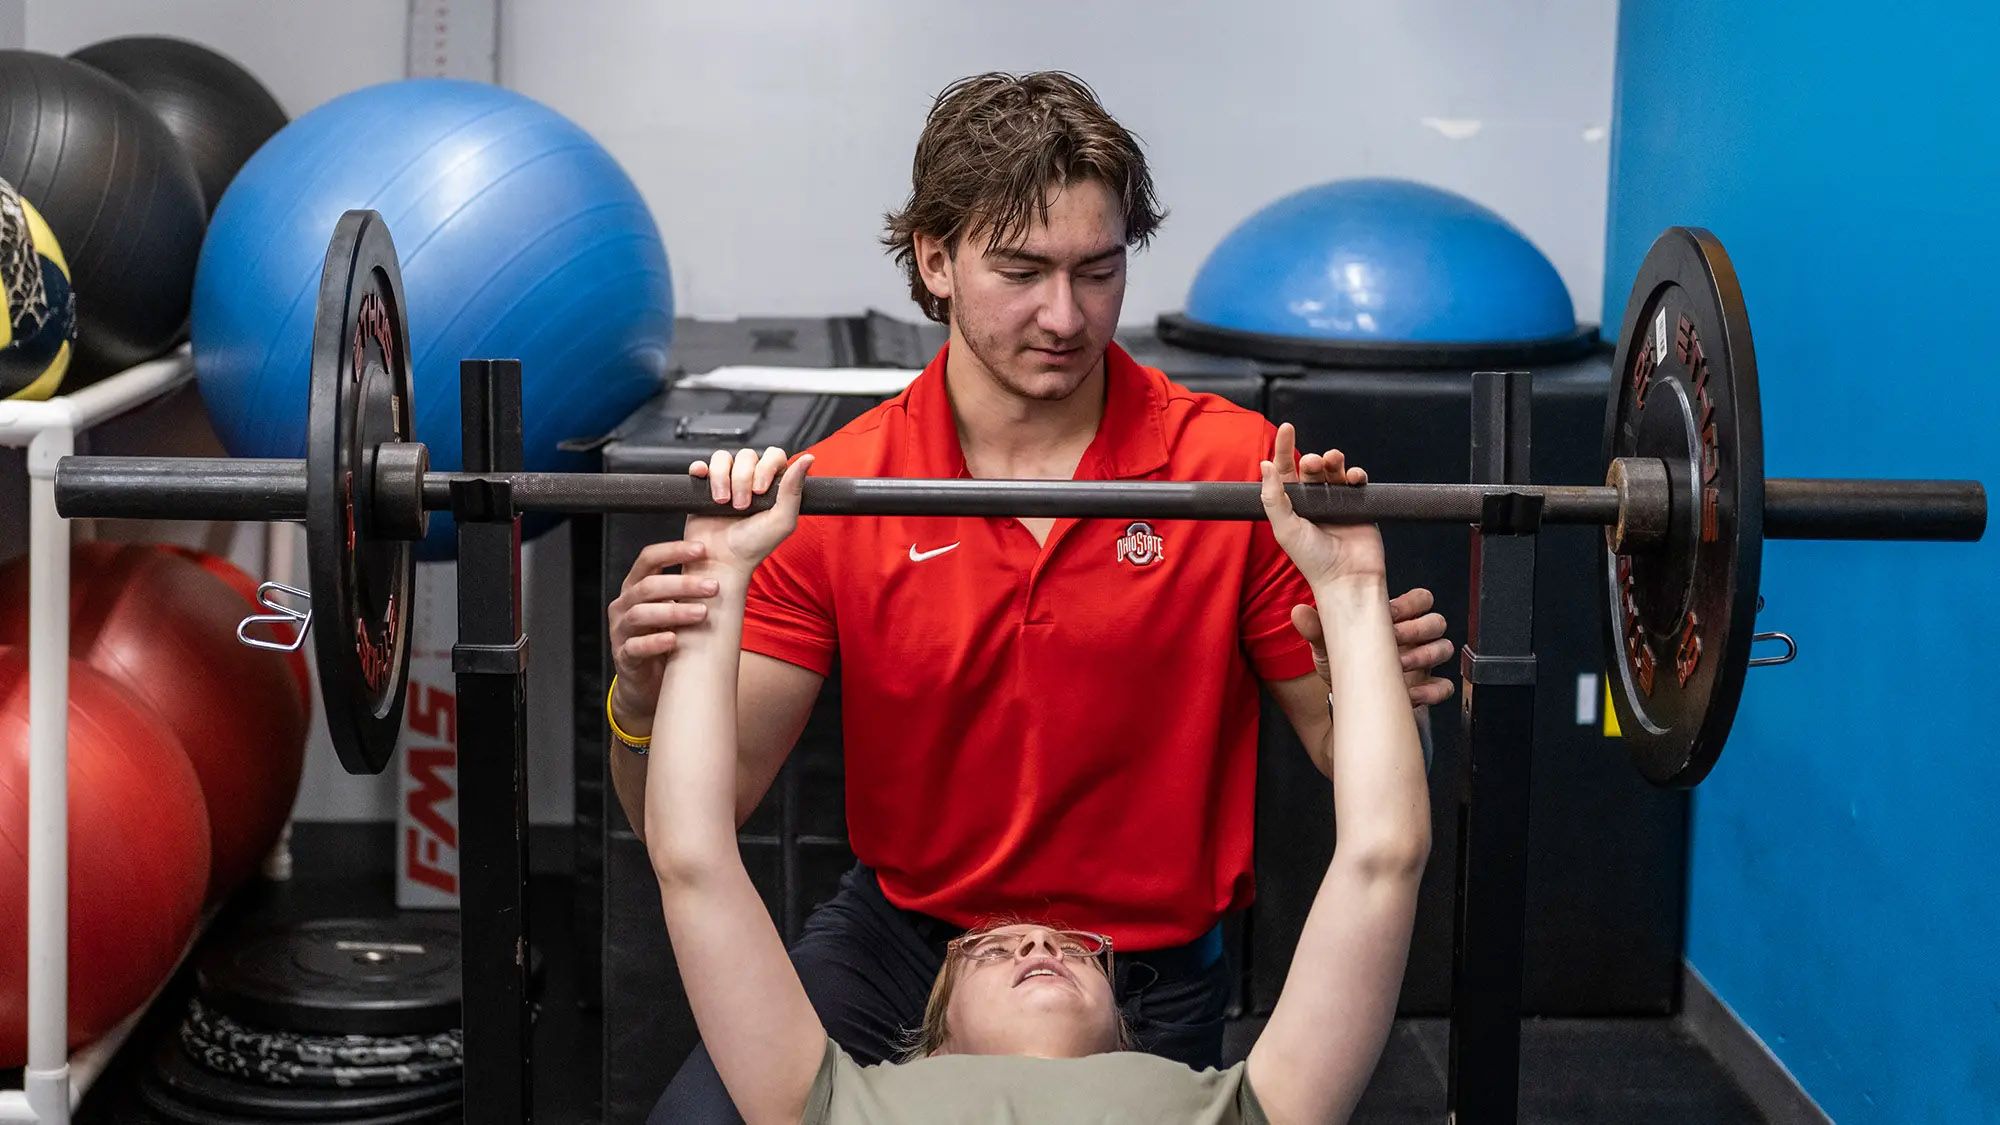 At a fitness gym, a young man with messy hair focuses on guiding a young woman getting ready to lift a weighted bar for a bench press. The man sits behind her, as she lies back on the bench and looks at the bar. He barely touches her wrists.  